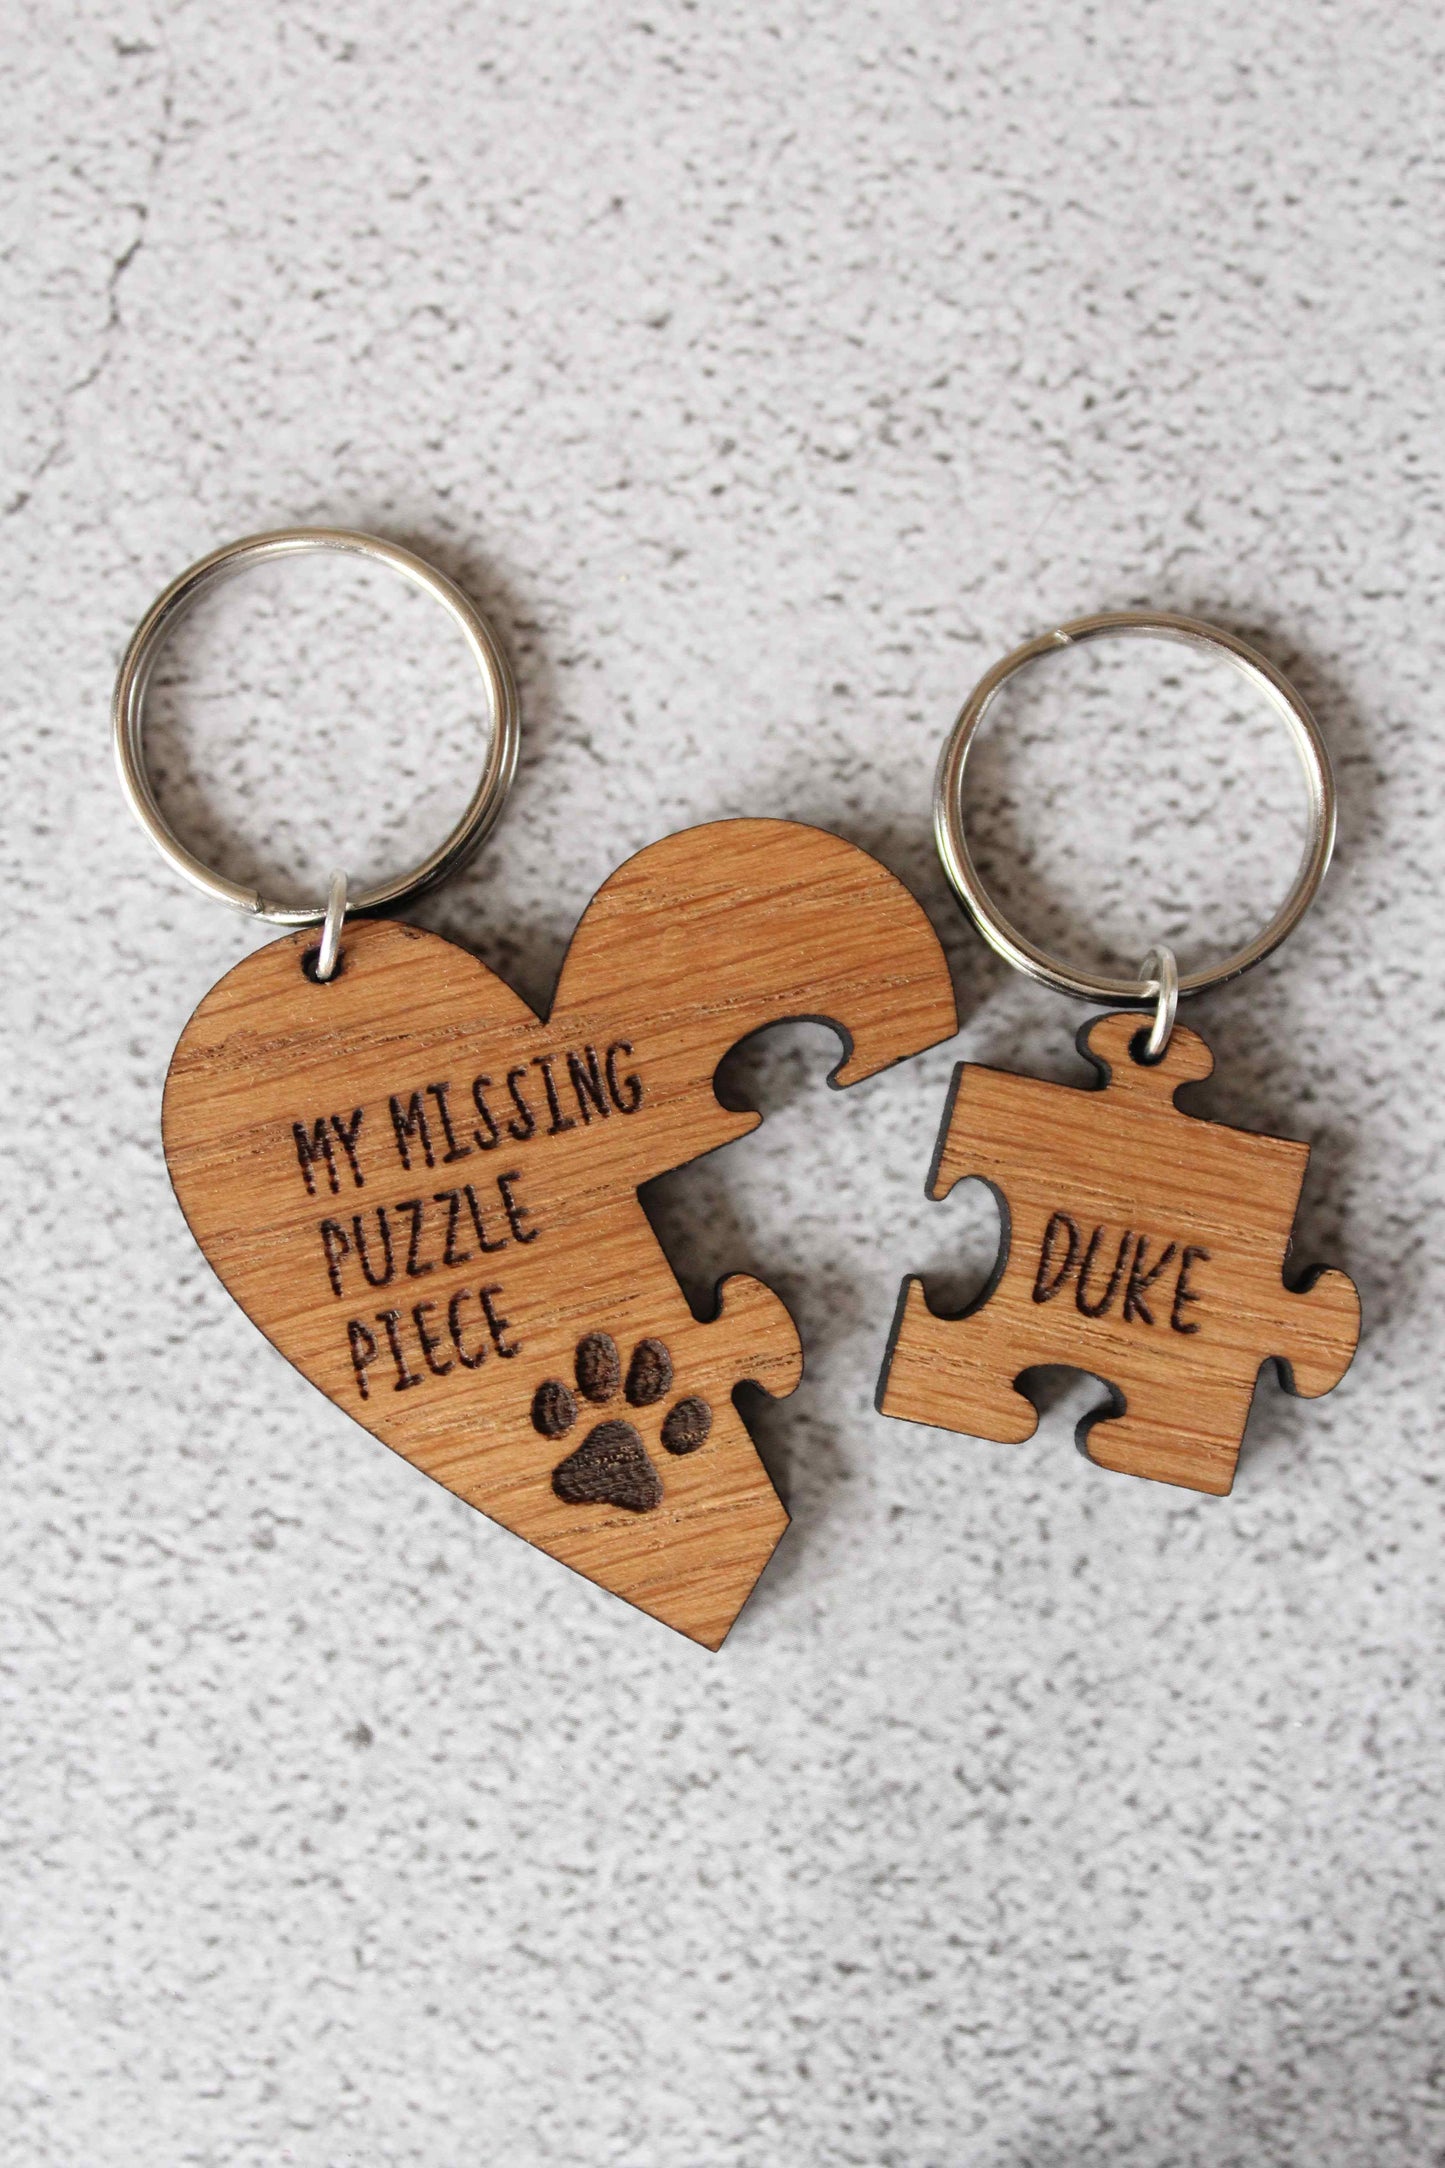 My Missing Puzzle Piece - Pet Keyring